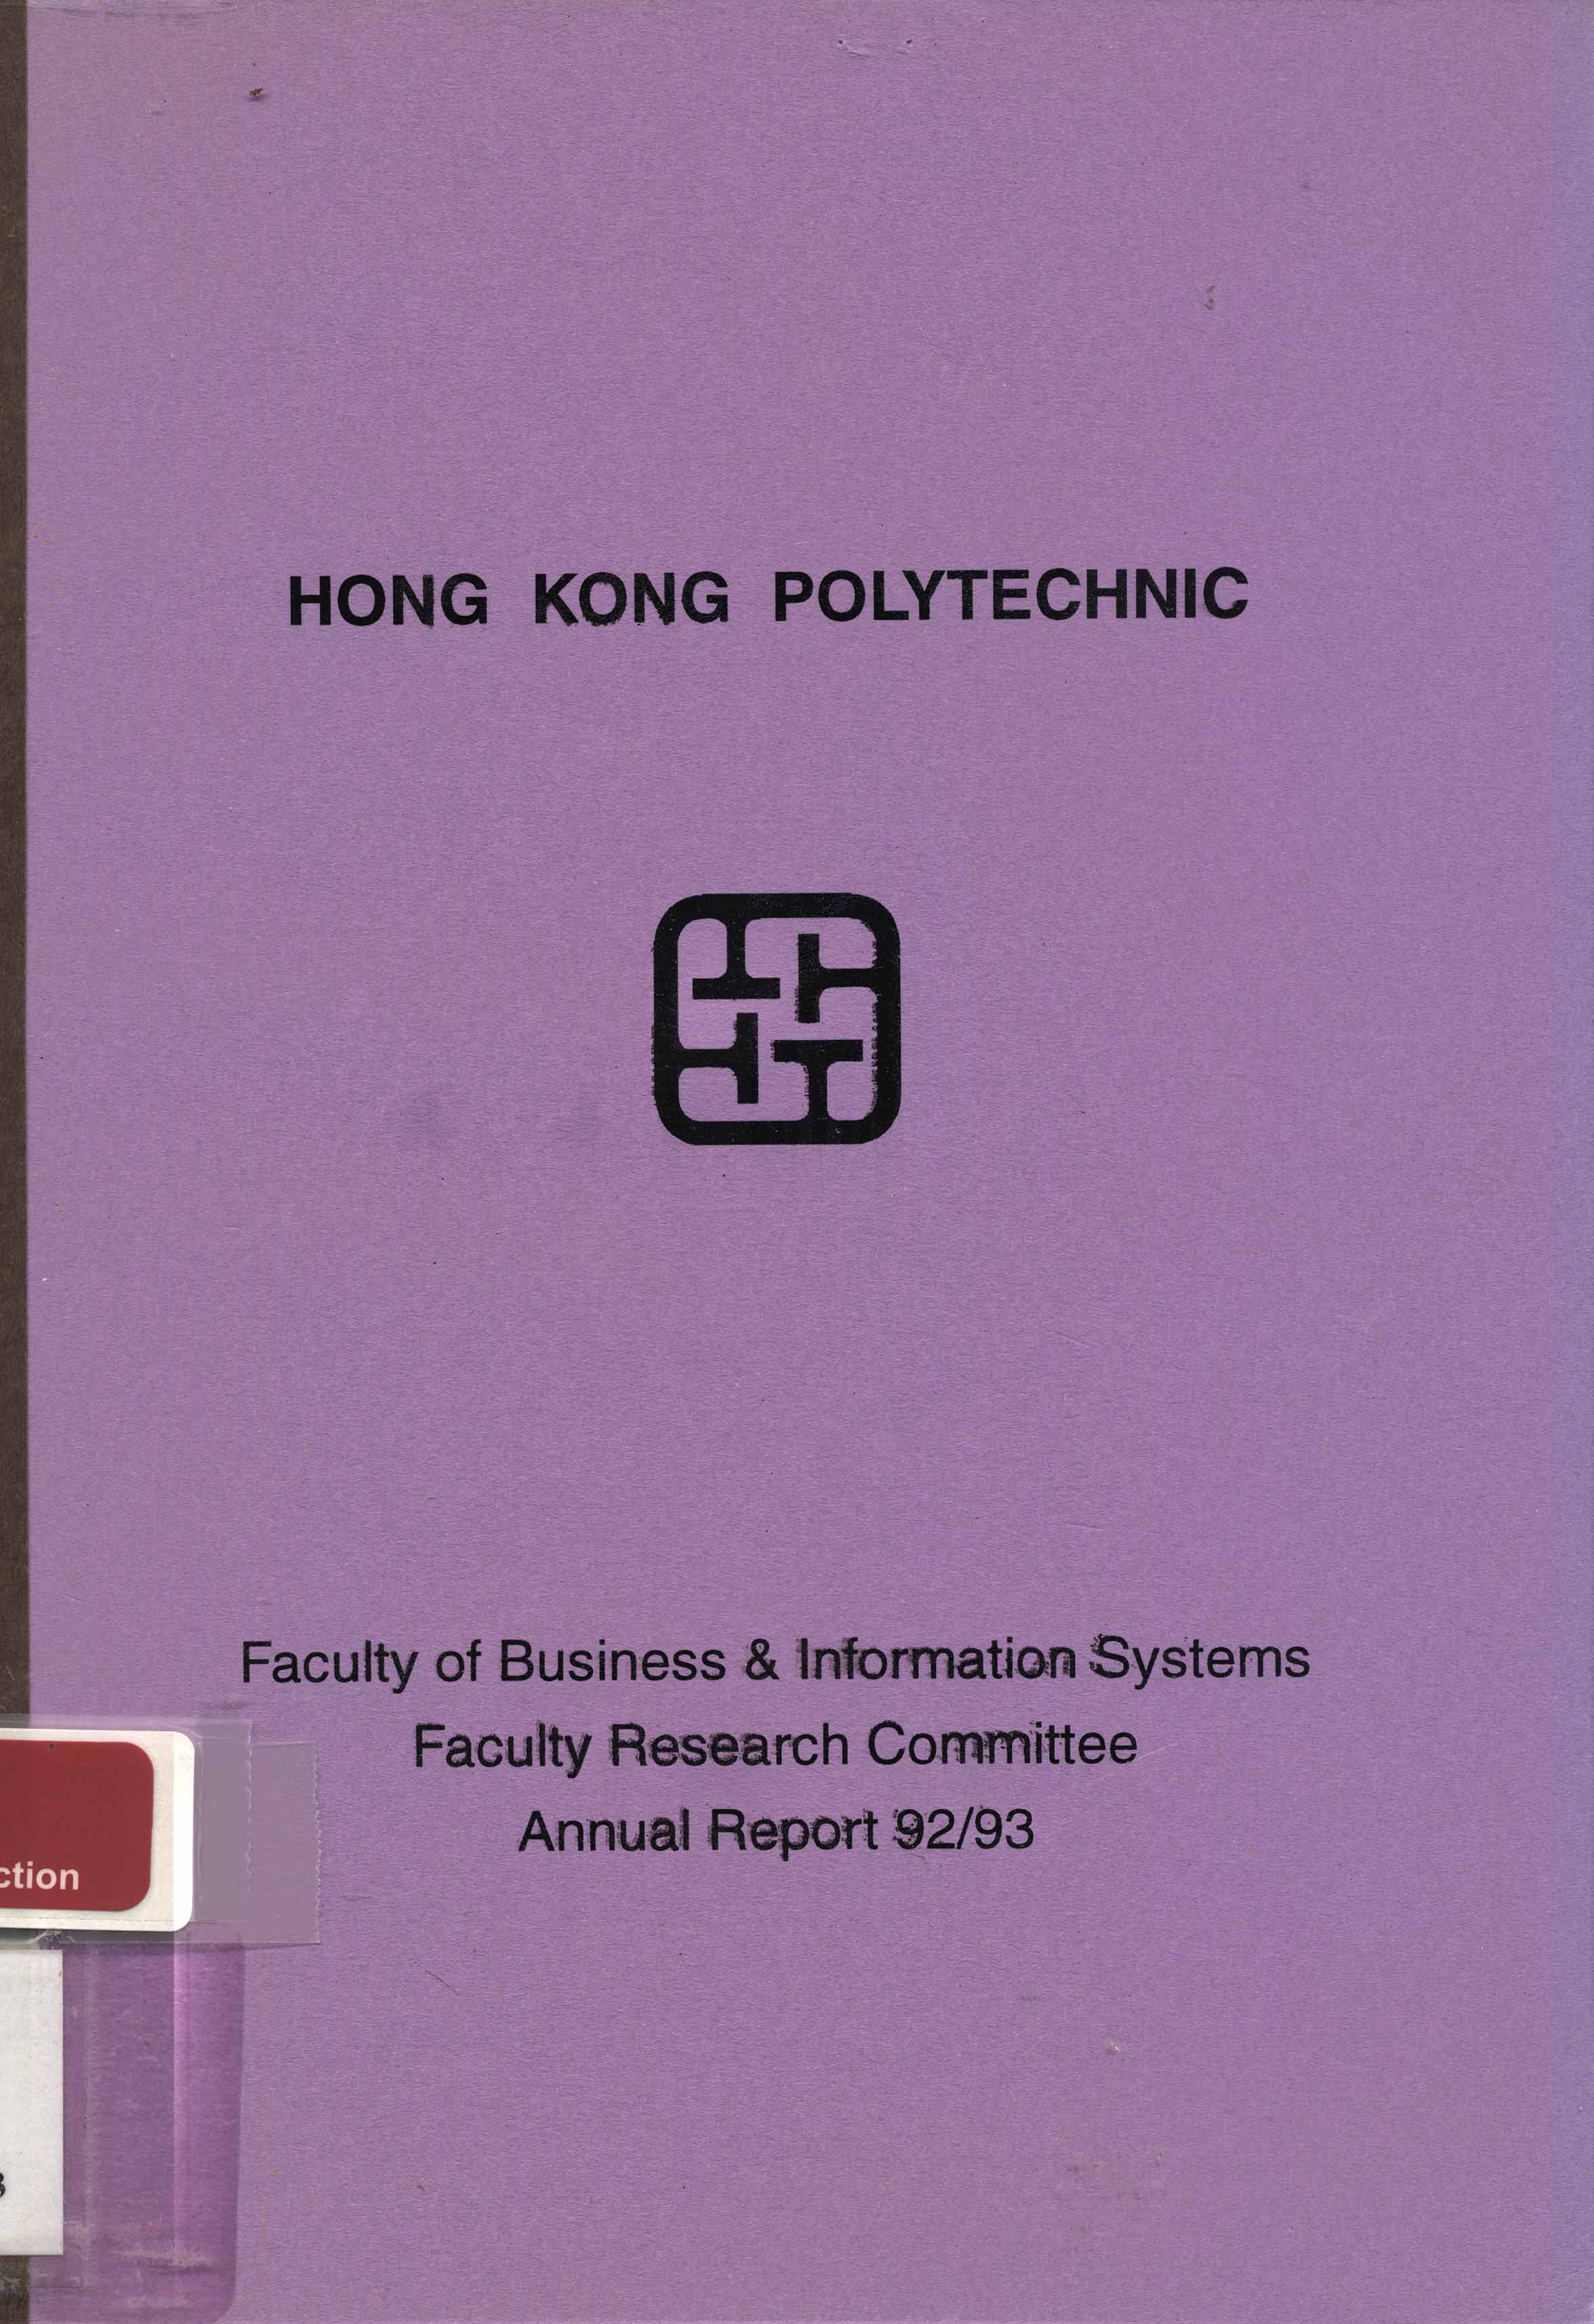 Faculty of Business and Information Systems. Faculty Research Committee. Annual report 92/93